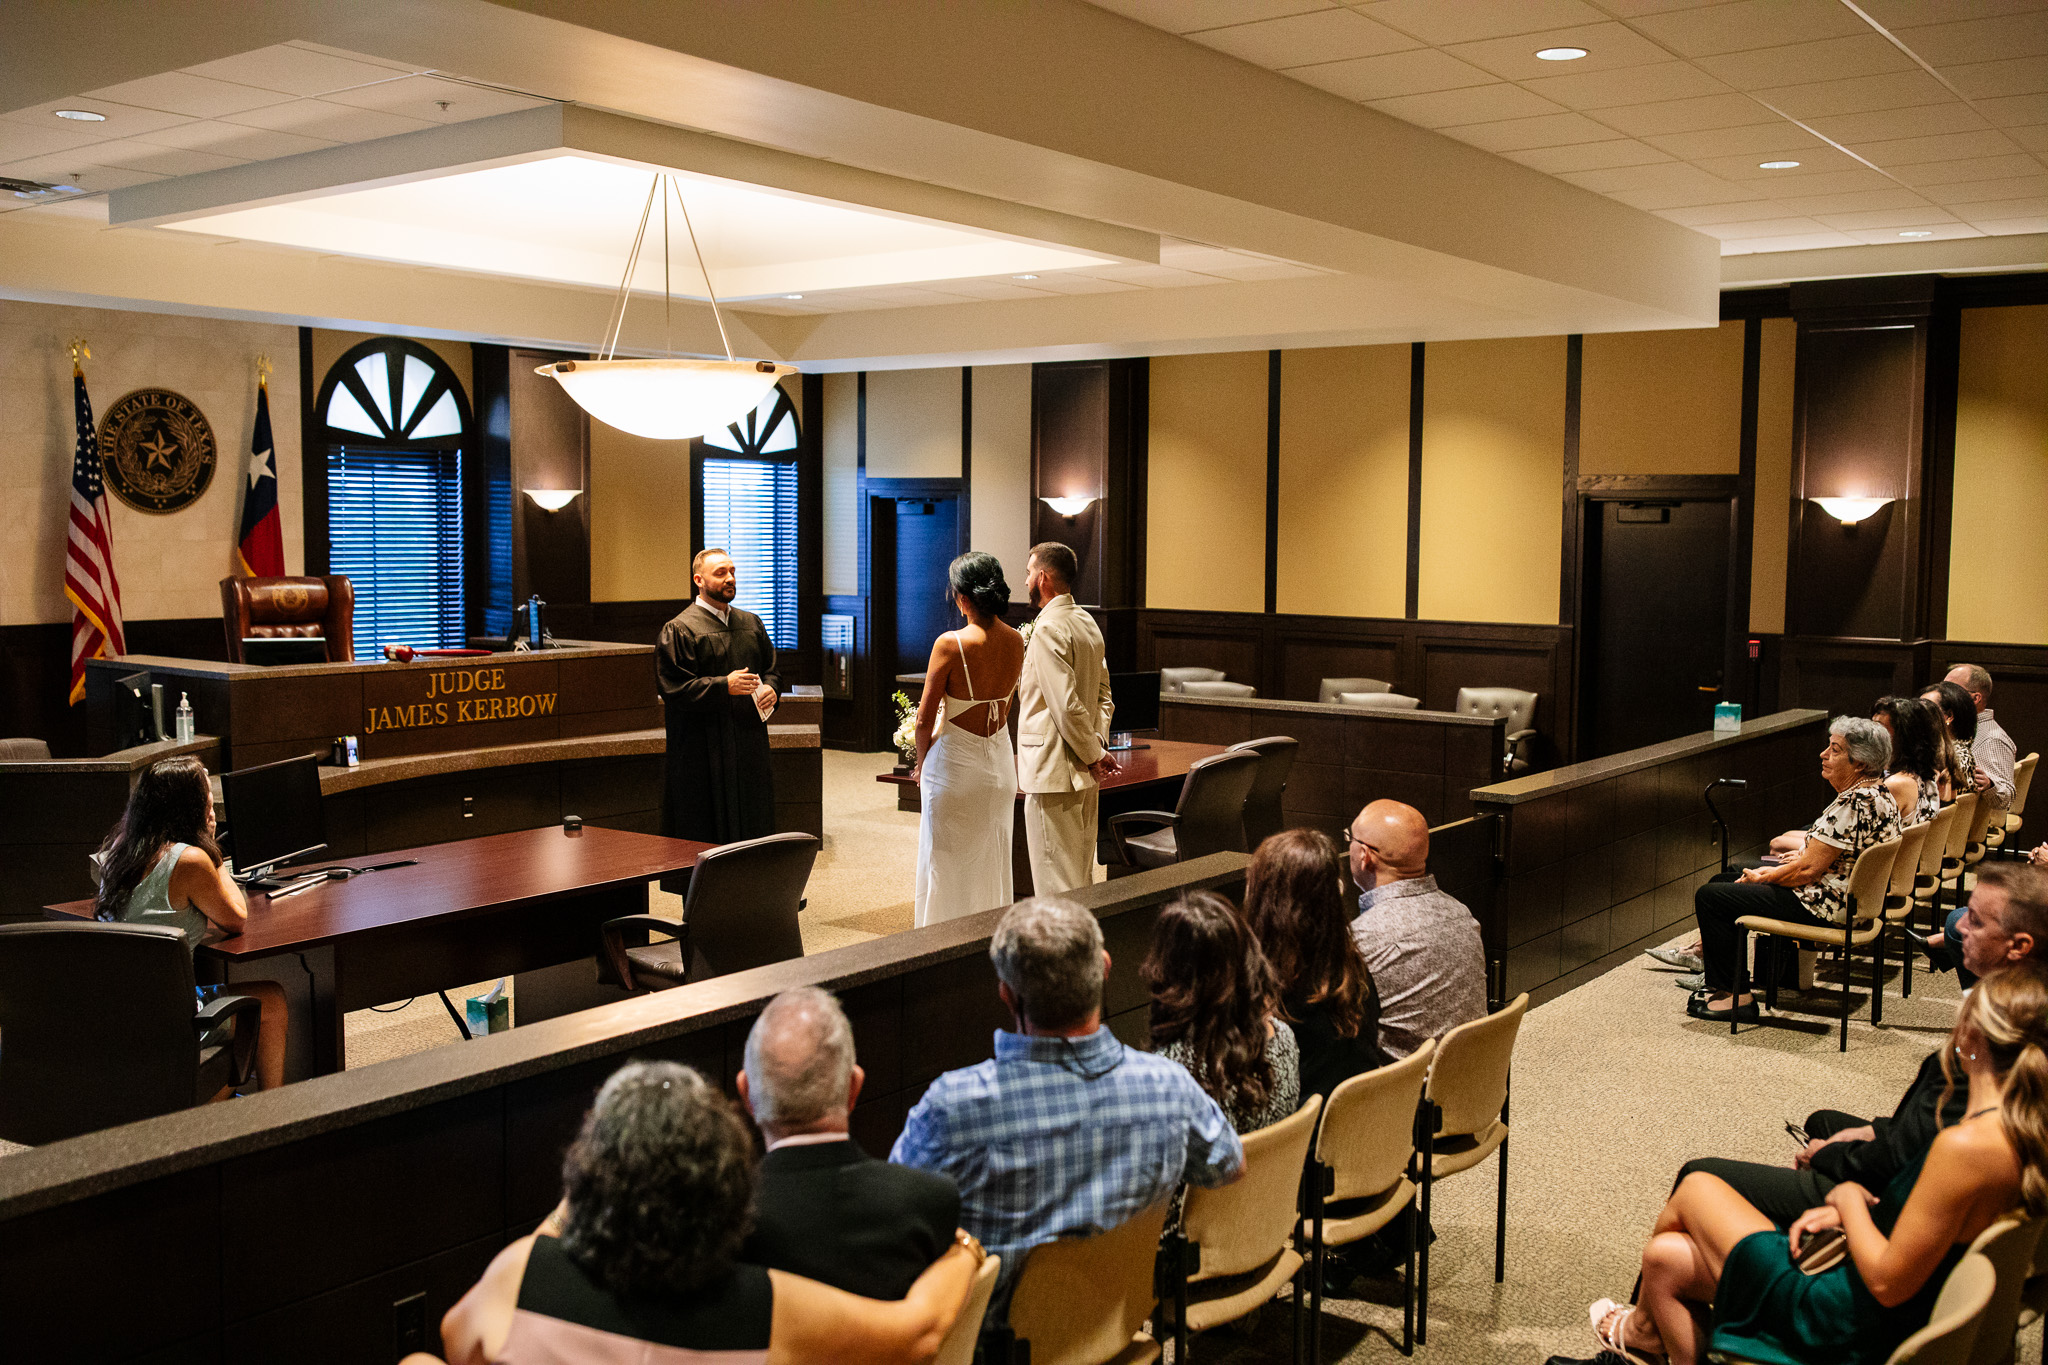 Denton County Courthouse Elopement 